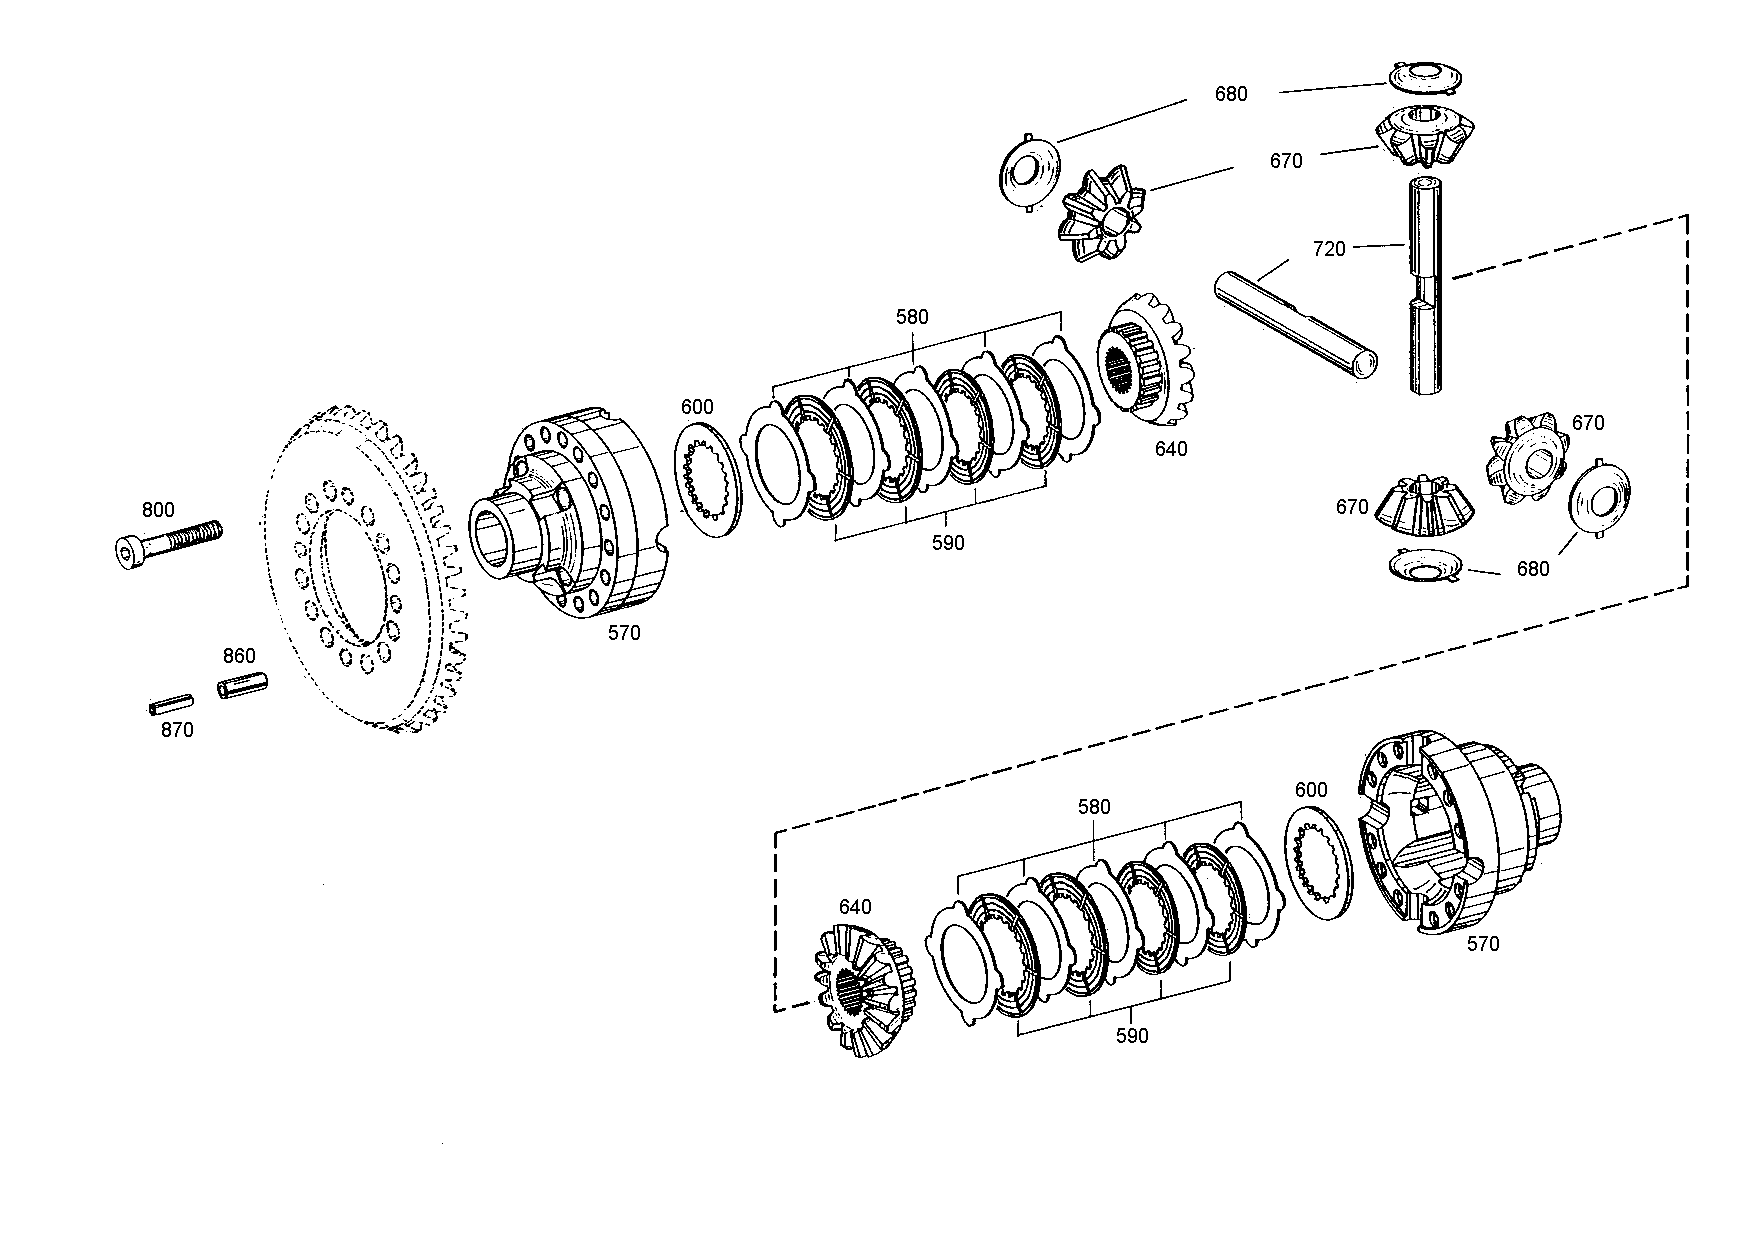 drawing for JOHN DEERE AT78496 - LIMIT.SLIP DIFF (figure 1)